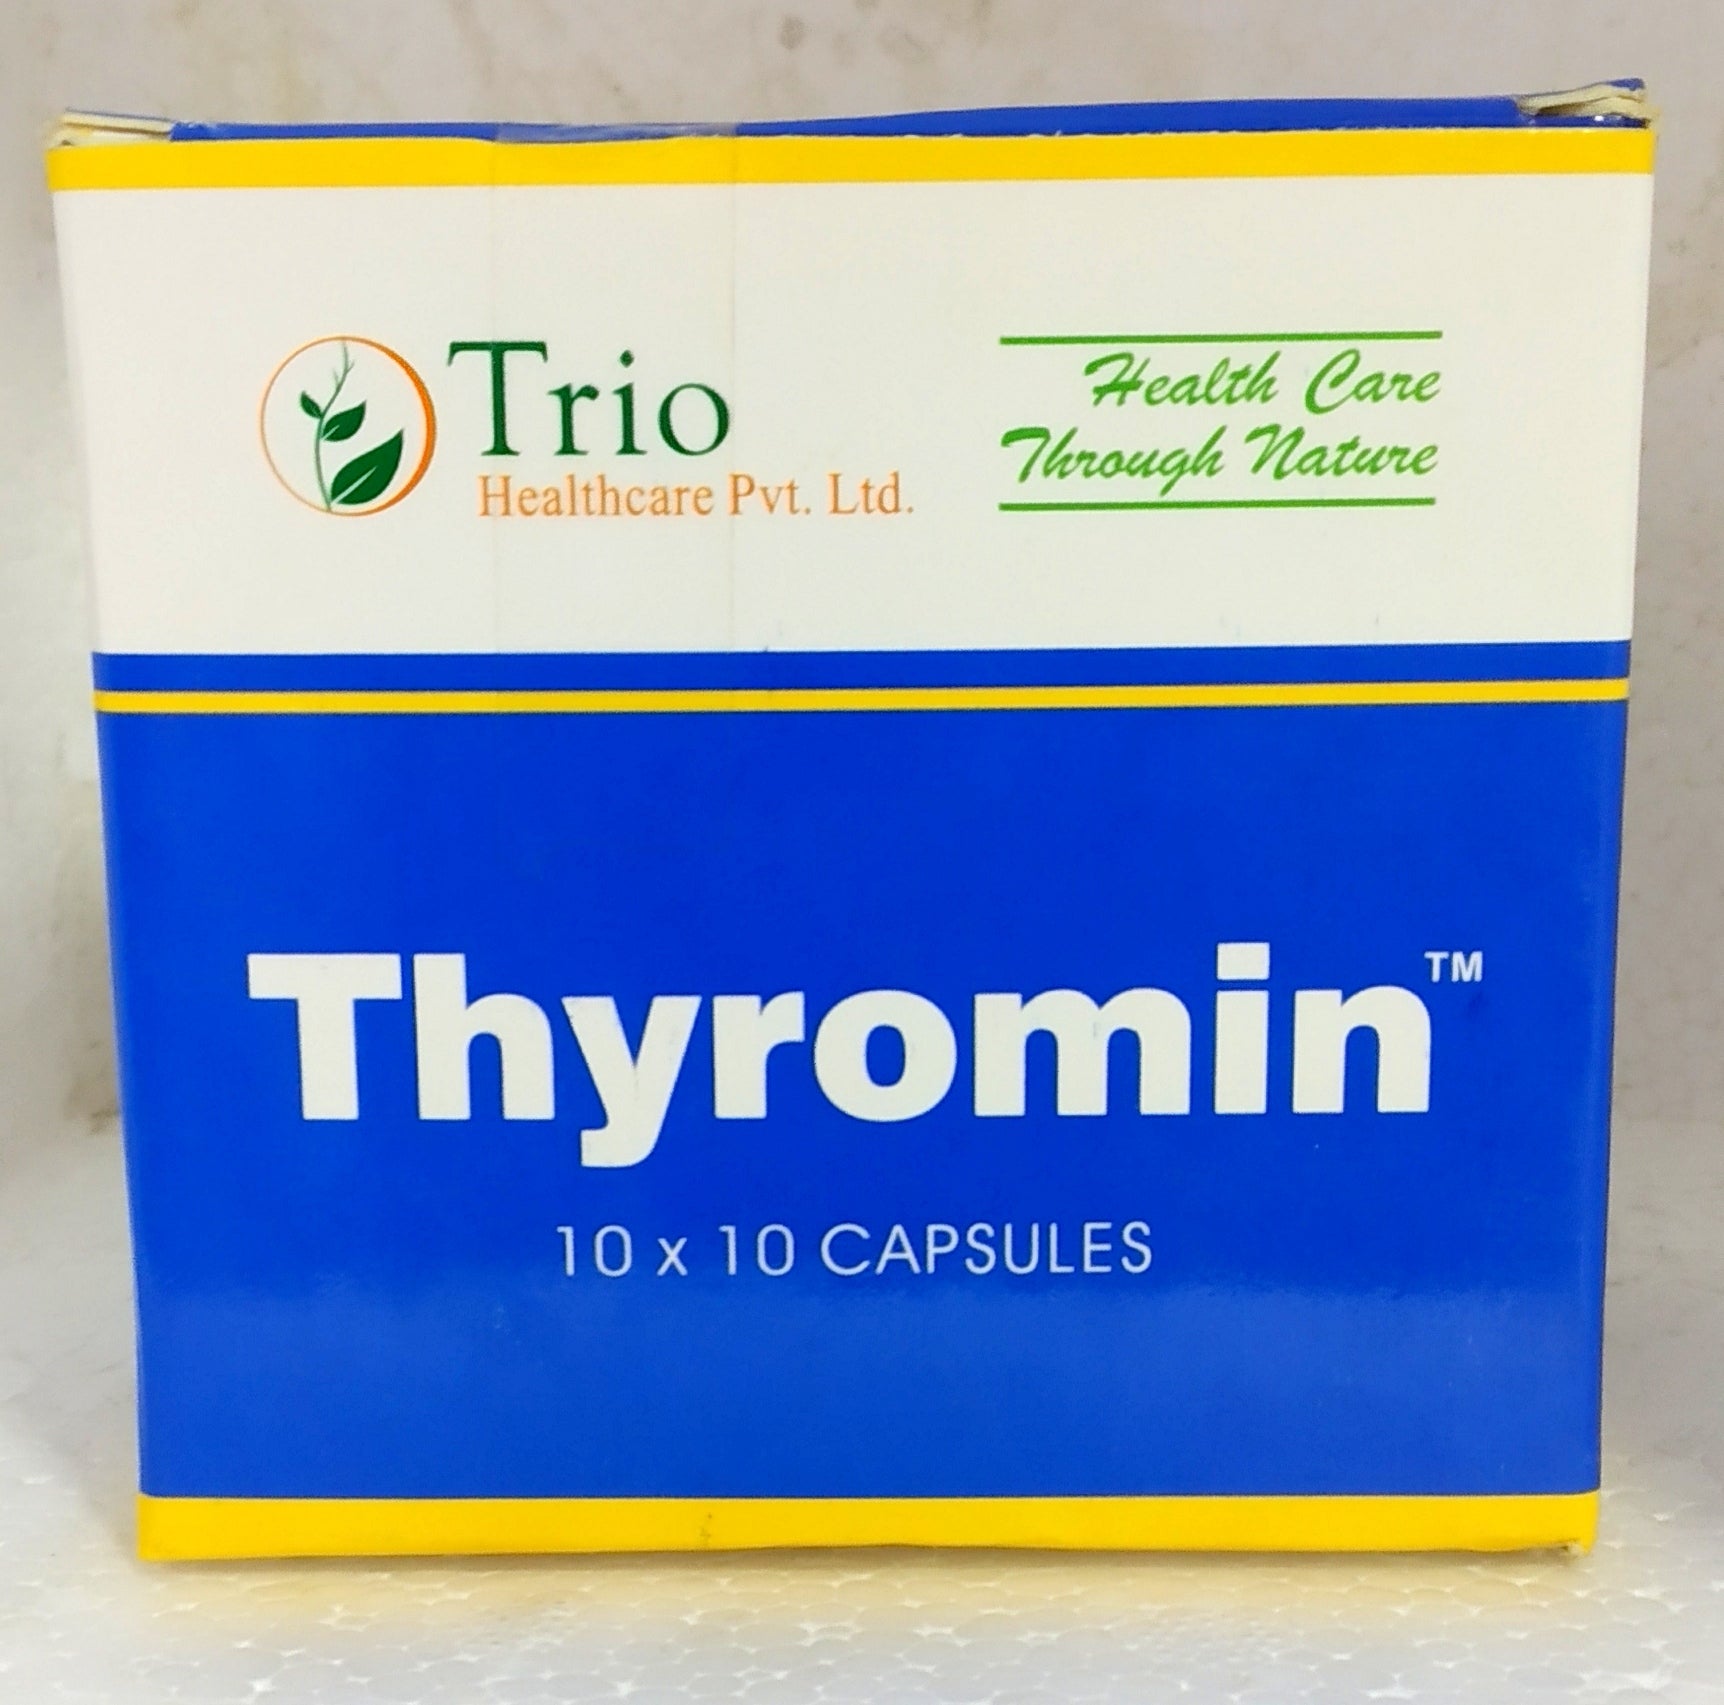 Shop Thyromin 10Capsules at price 58.00 from Trio Online - Ayush Care